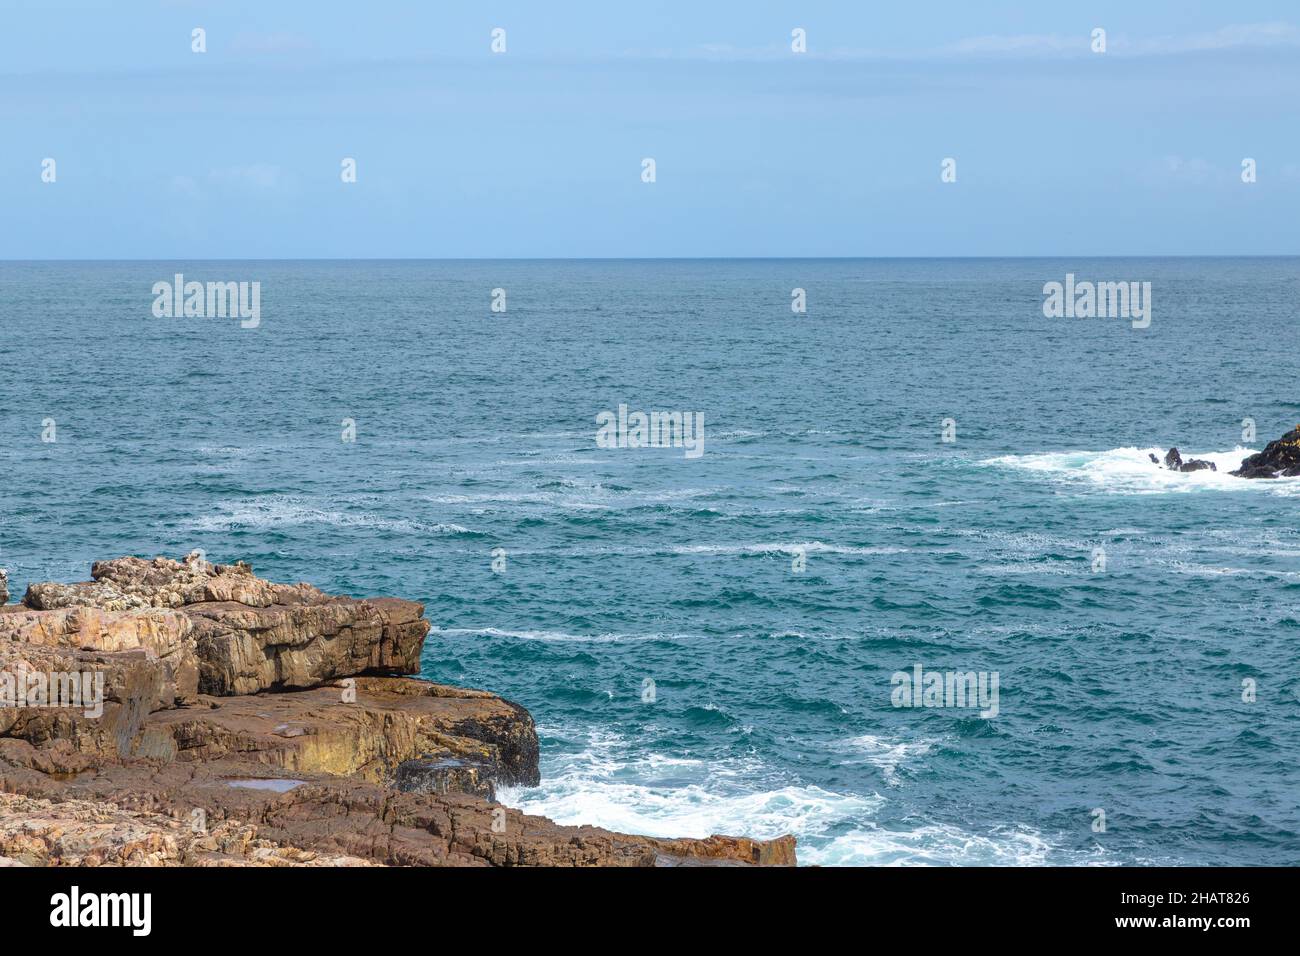 Look out on the Indian Ocean from the Cliff Path of Hermanus in the Western Cape of South Africa Stock Photo